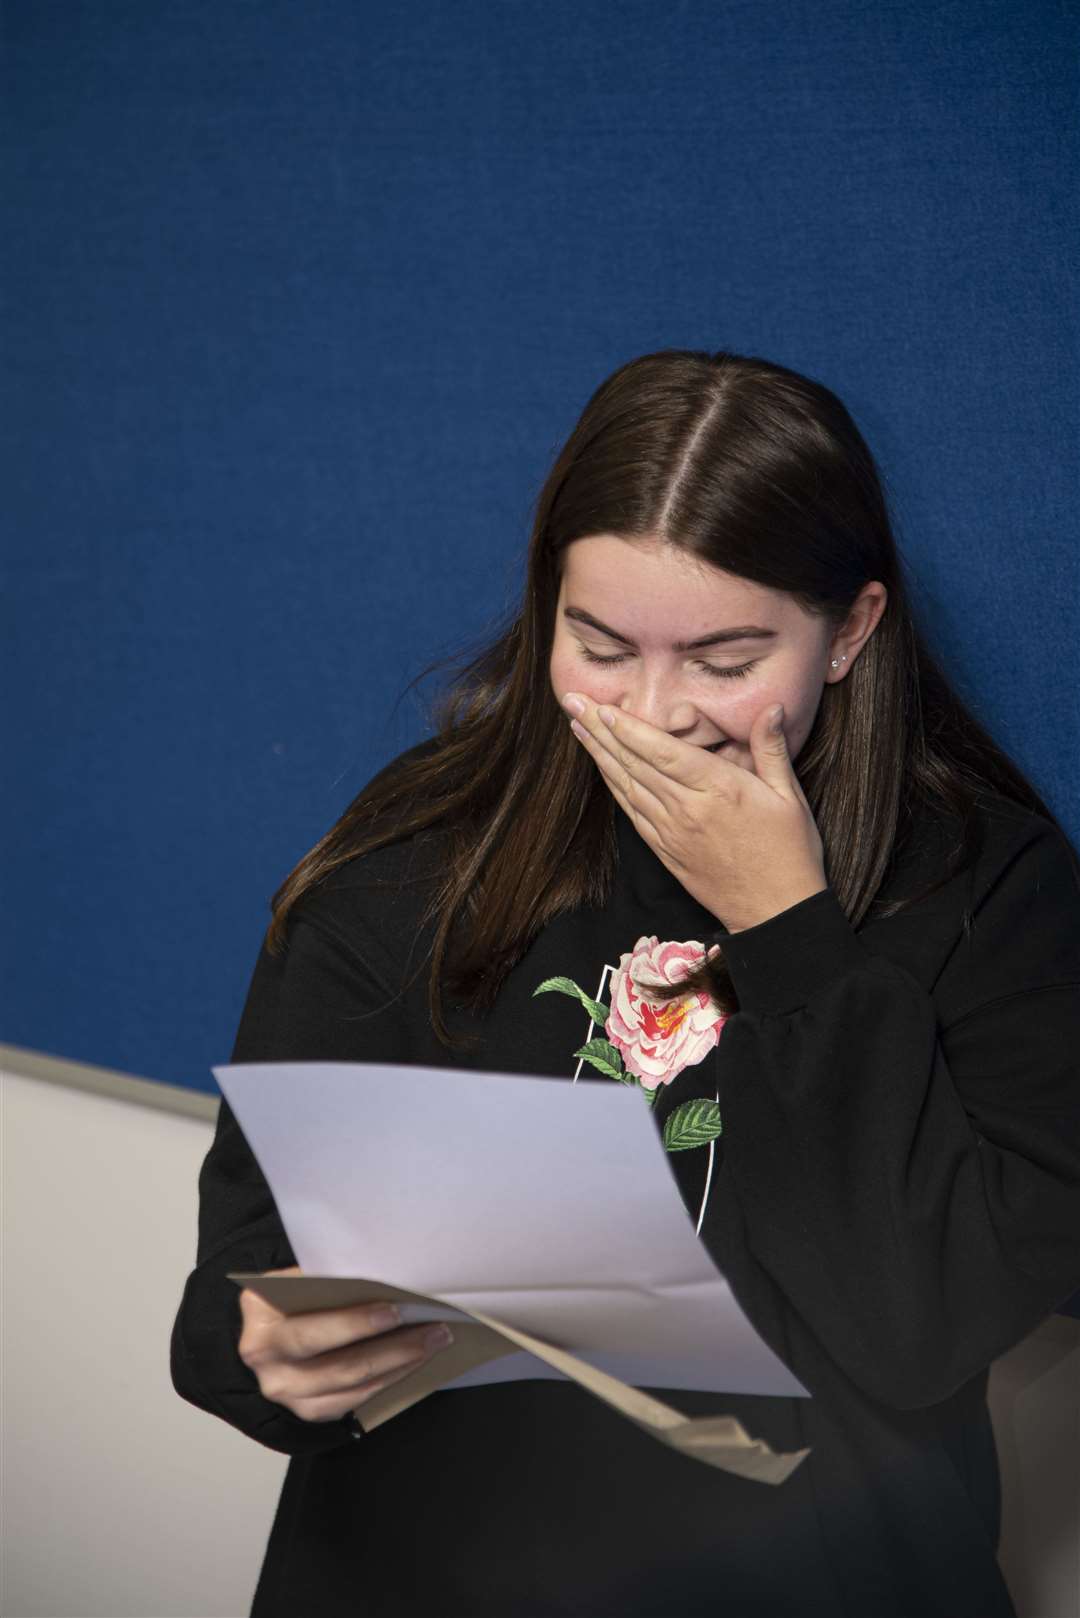 Northfleet School for Girls pupils Lucy Street looks pleasantly surprised as she opens her GCSE results